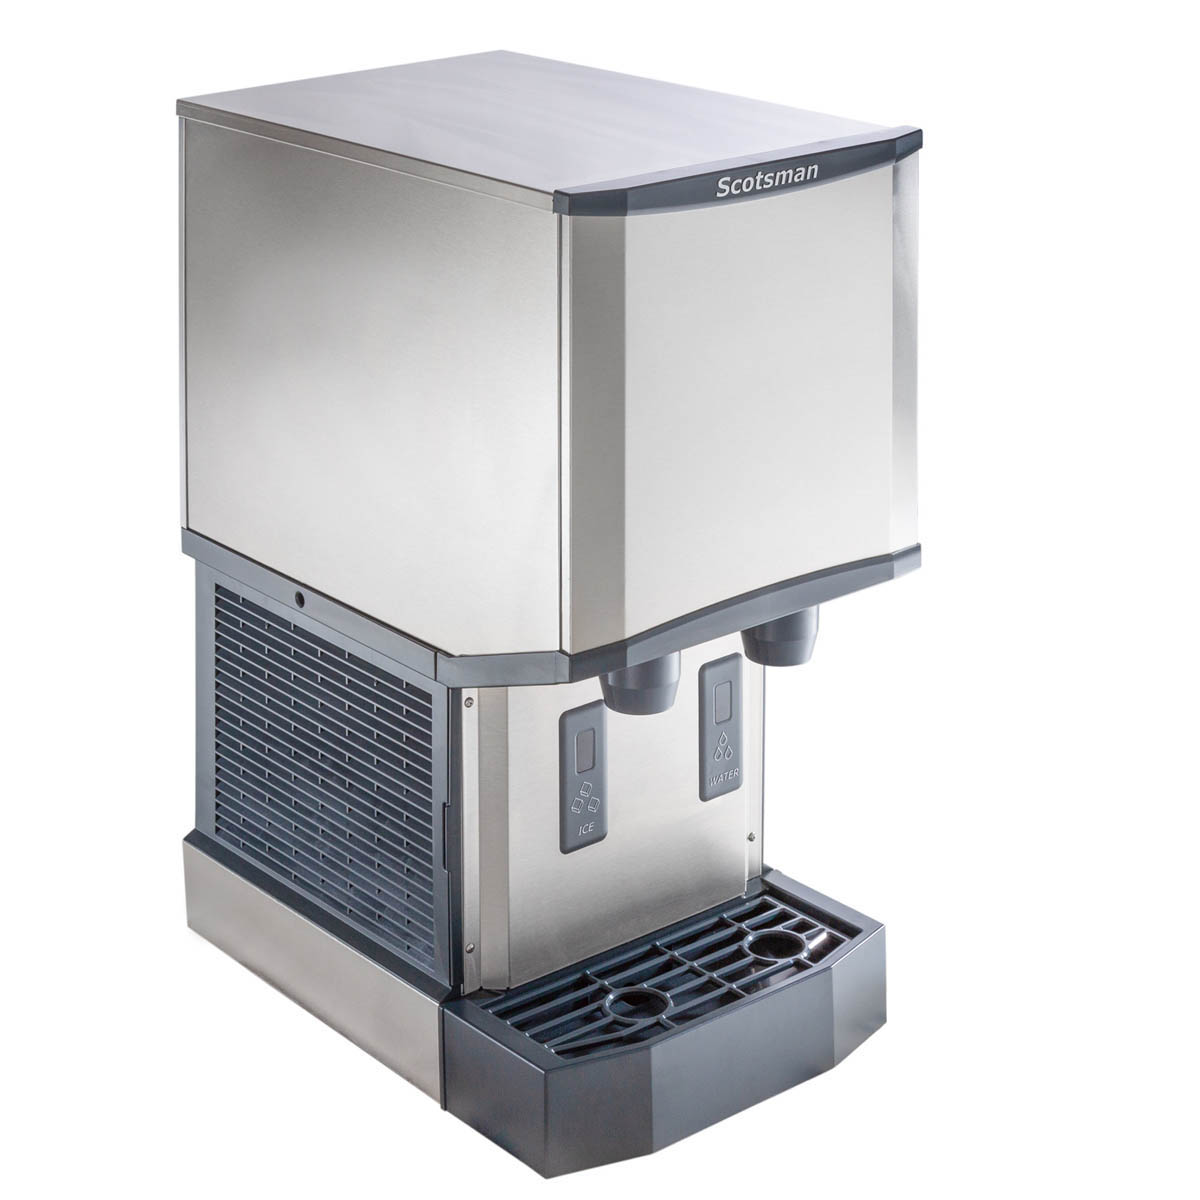 With Scotsman HID312AW-1 Easy to Serve Ice For Your Customers, Chef's Deal